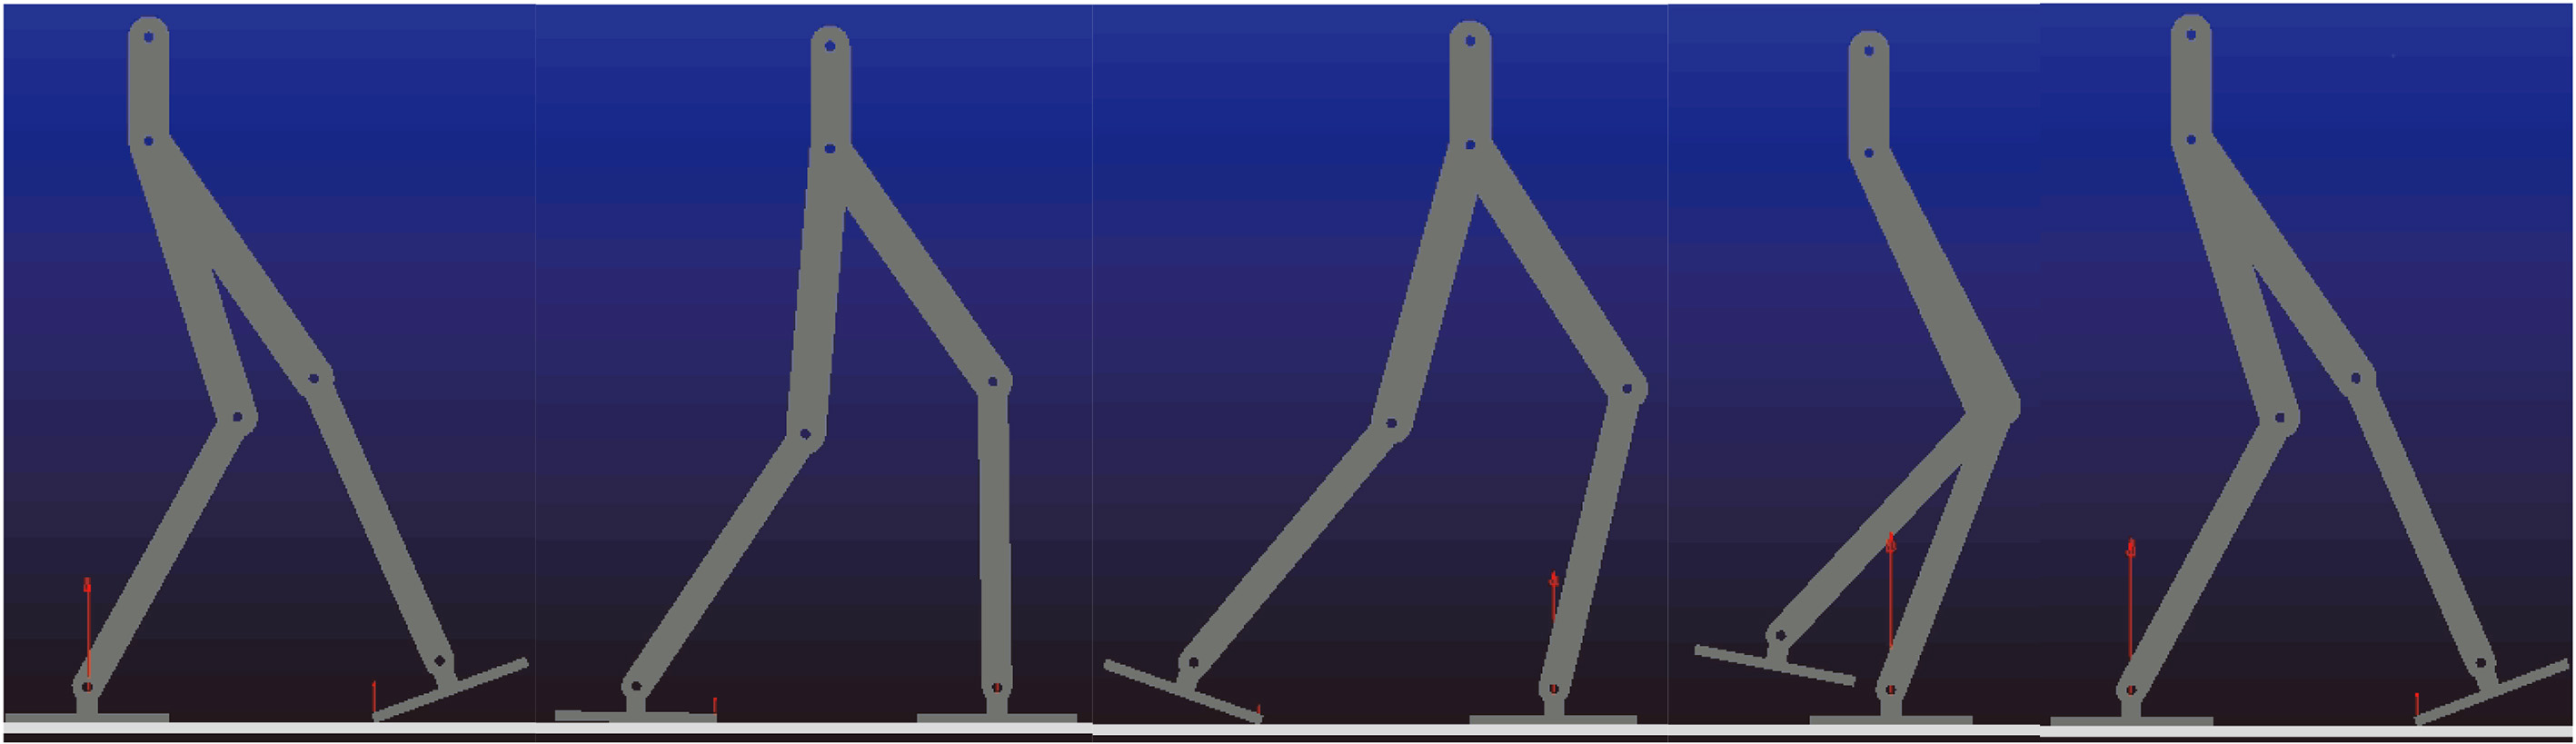 Dynamic simulation process of the biped robot.